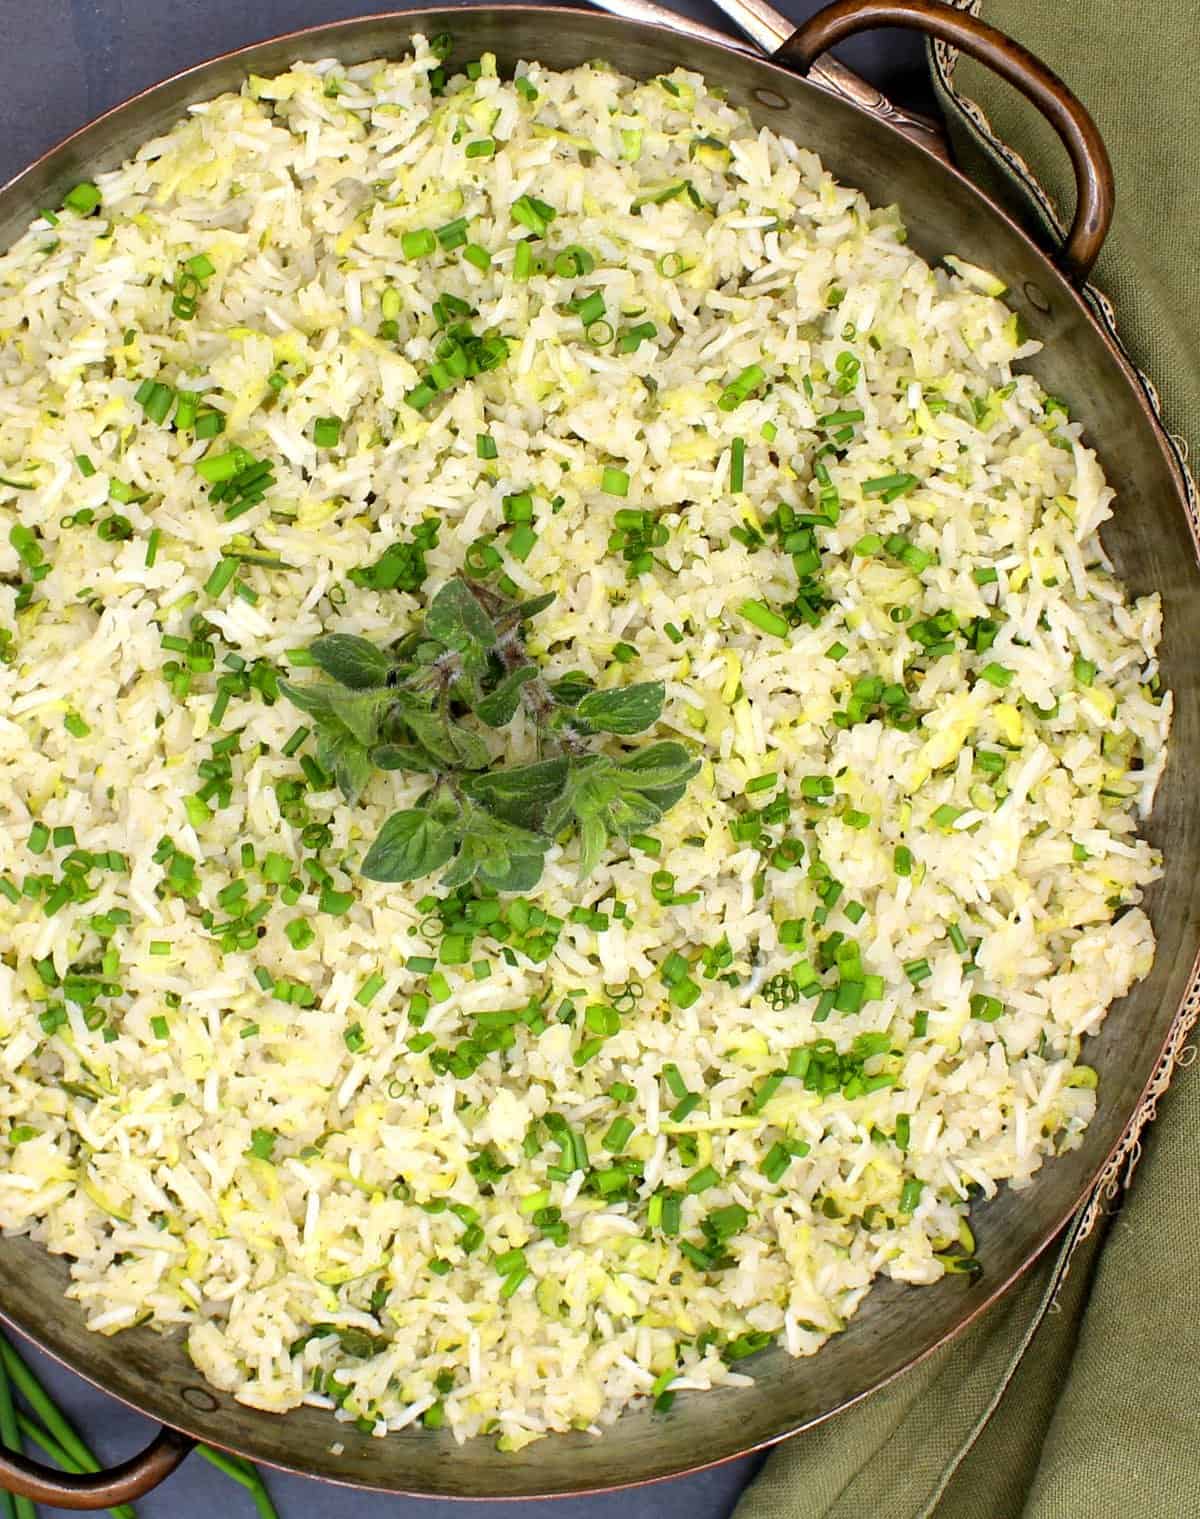 Overhead partial photo of a pot of vegan zucchini rice with chives, oregano and a green napkin next to it.